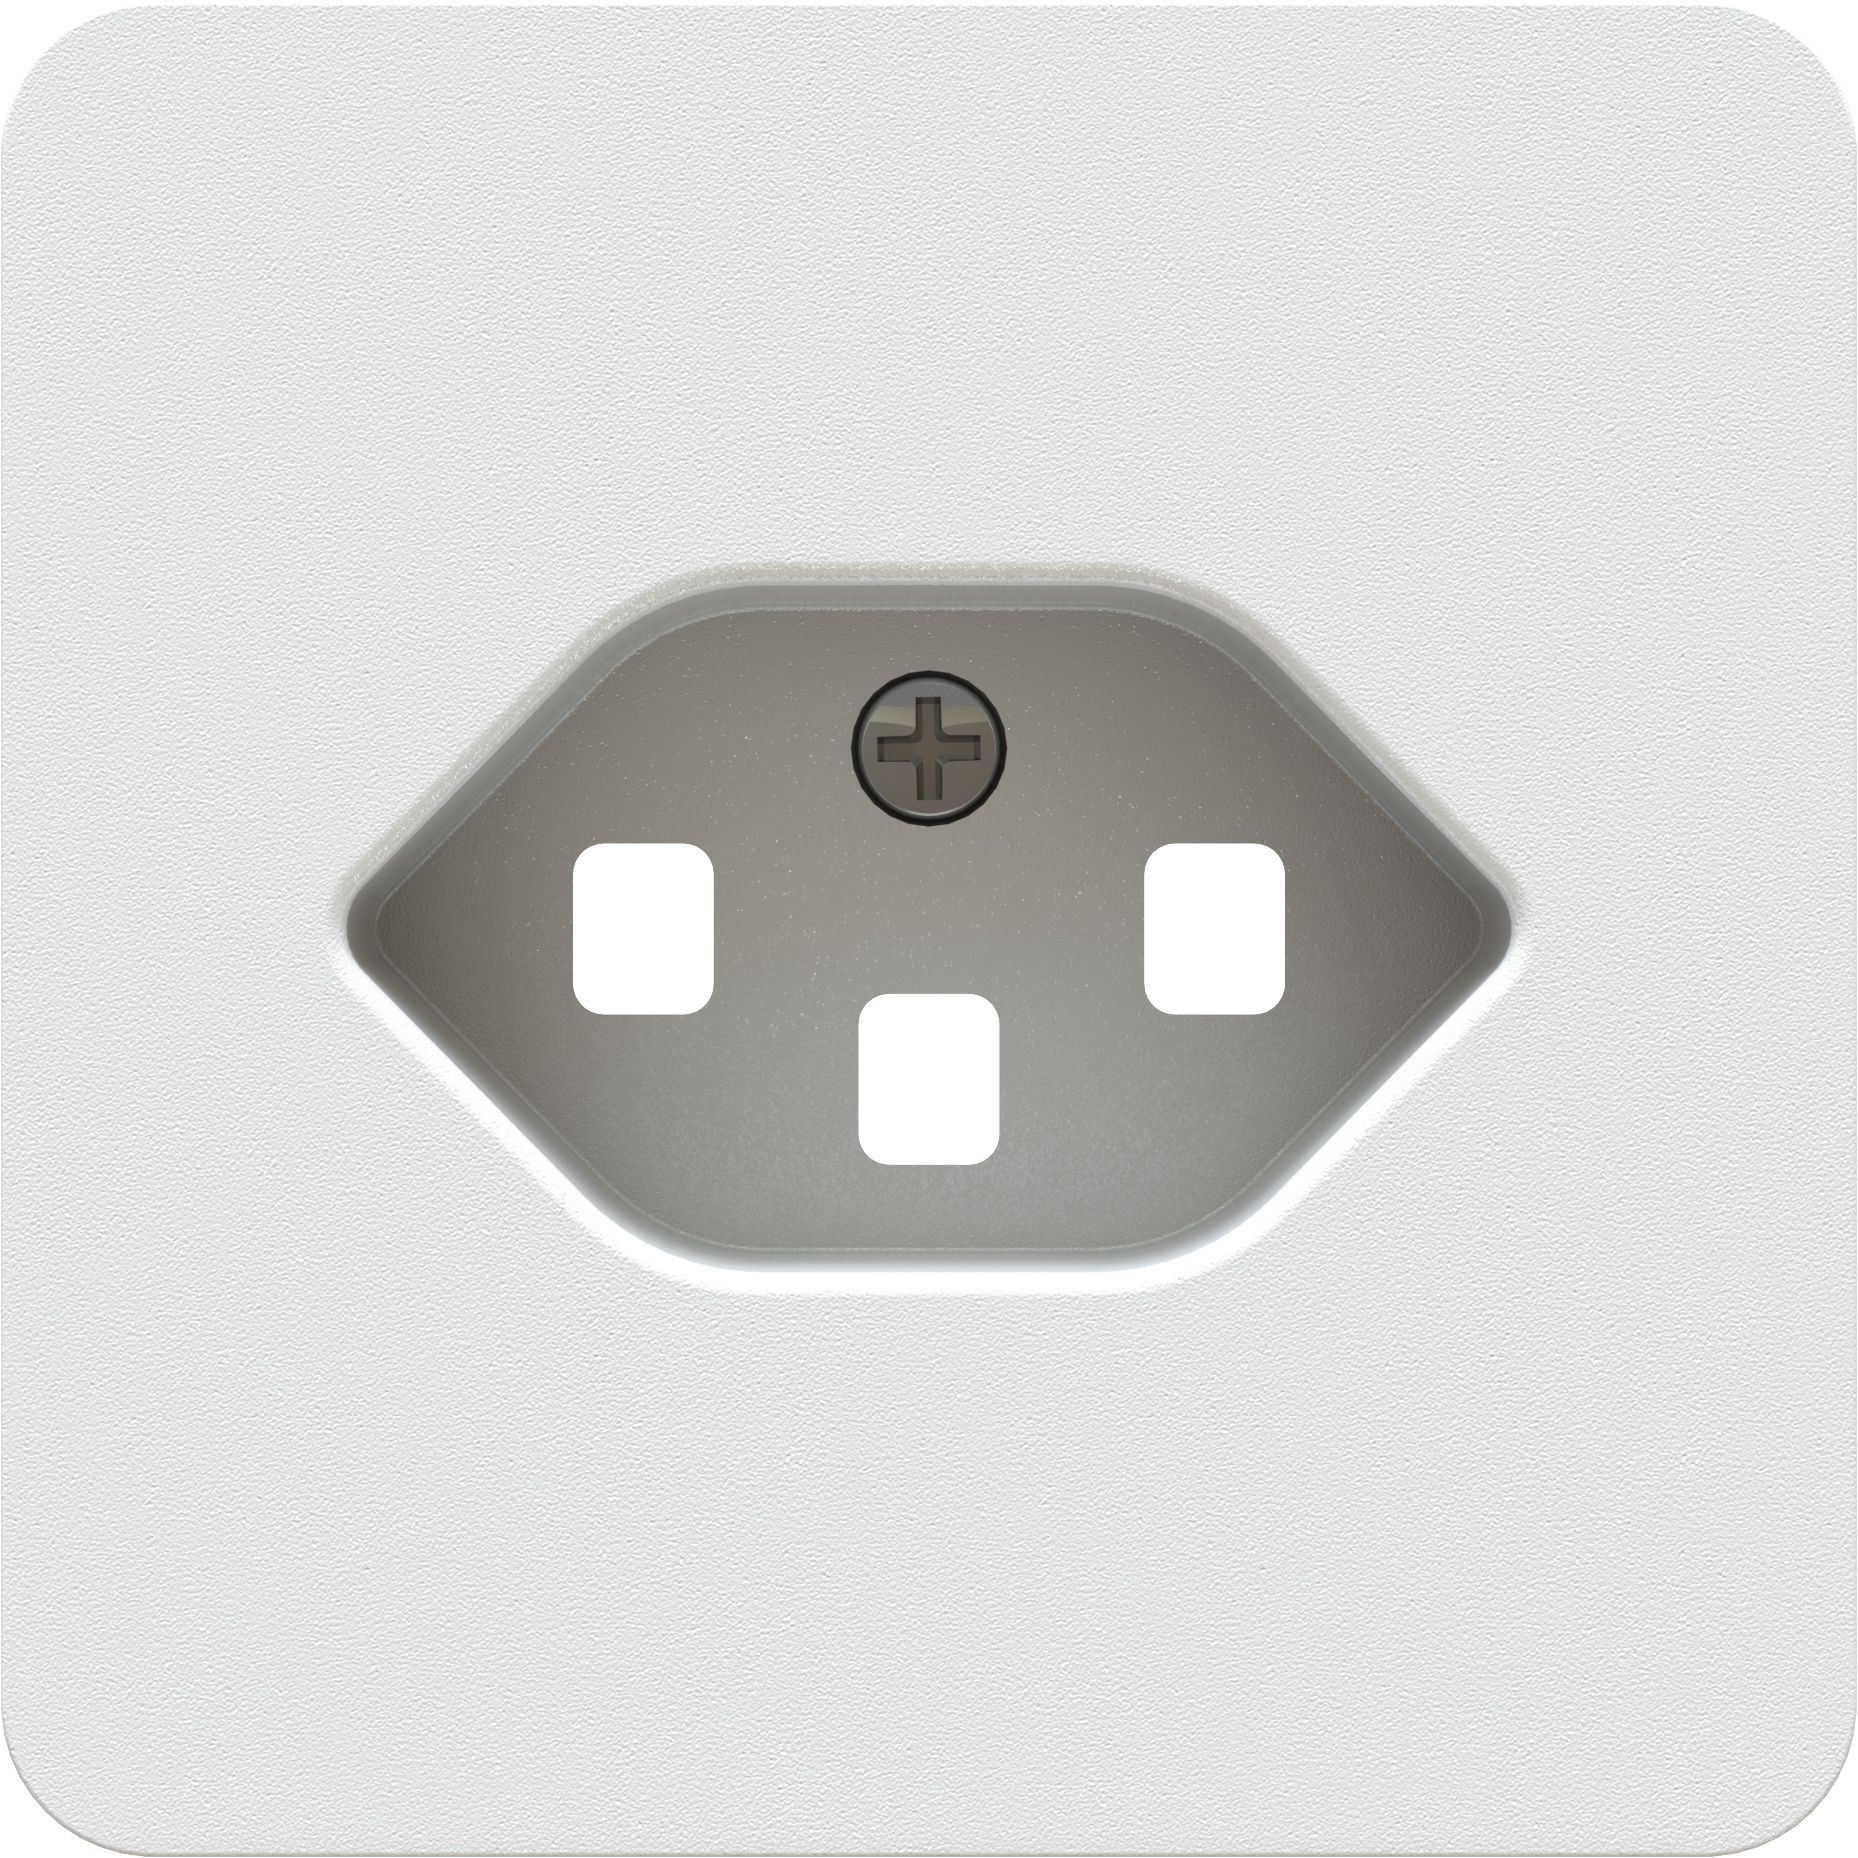 Central plate to wall socket 1x type 23 priamos white